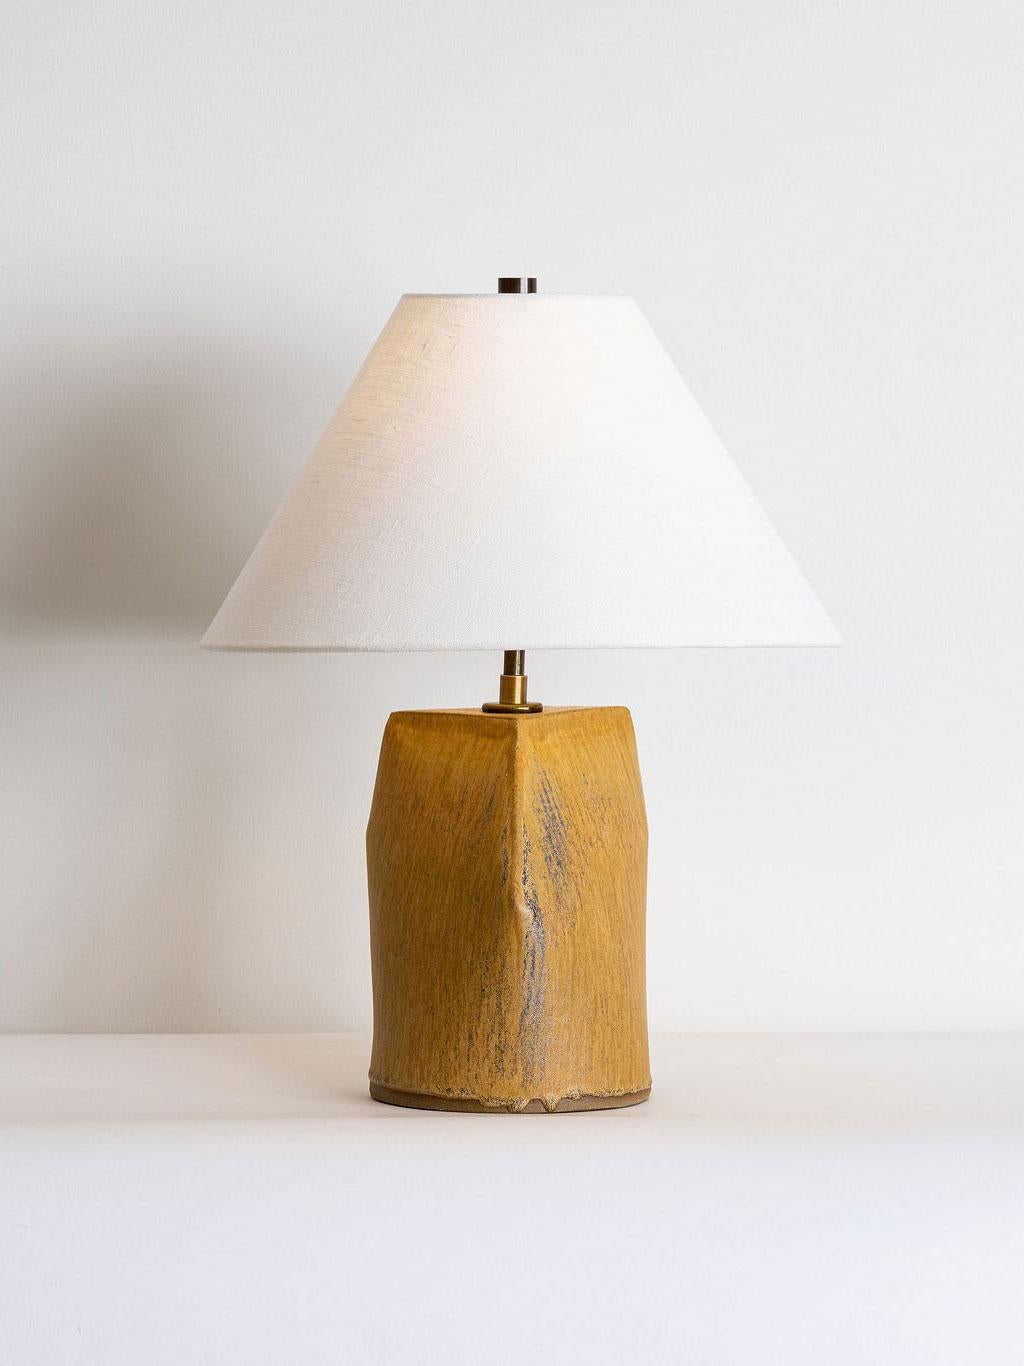 Our stoneware Mast Lamp is handcrafted using slab-construction techniques. 

FINISH

- Dipped glaze, pictured in Hide
- Antique brass fittings
- Twisted beige-cloth cord
- Full-range dimmer socket
- Off-white paper or linen